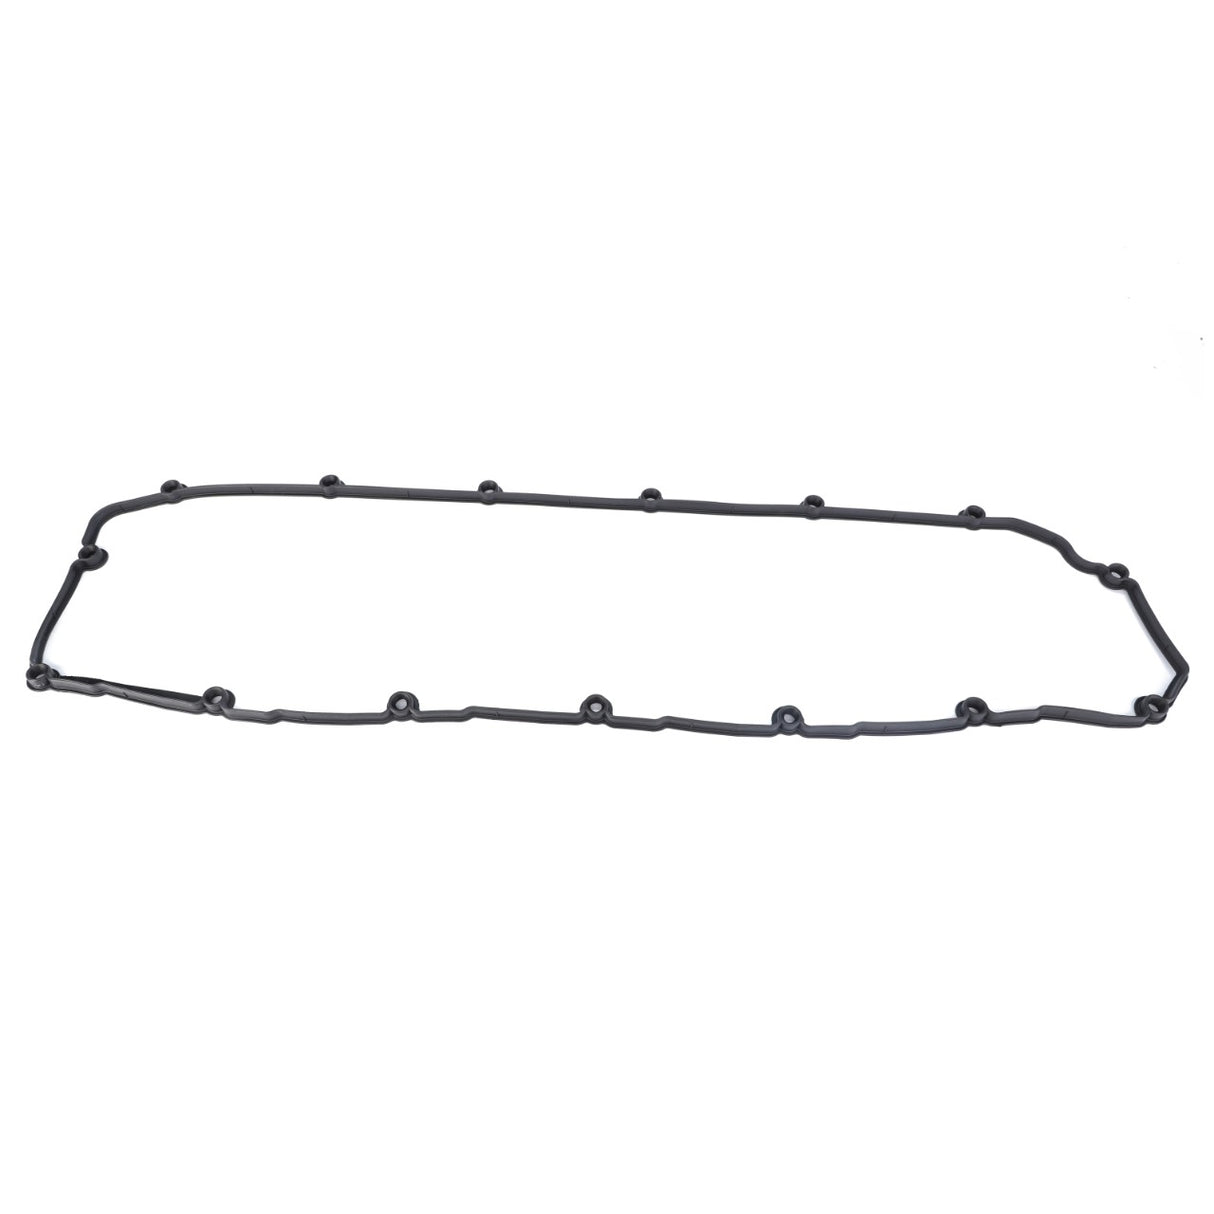 AGCO | Gasket, Cylinder Head Cover - F934201210010 - Farming Parts